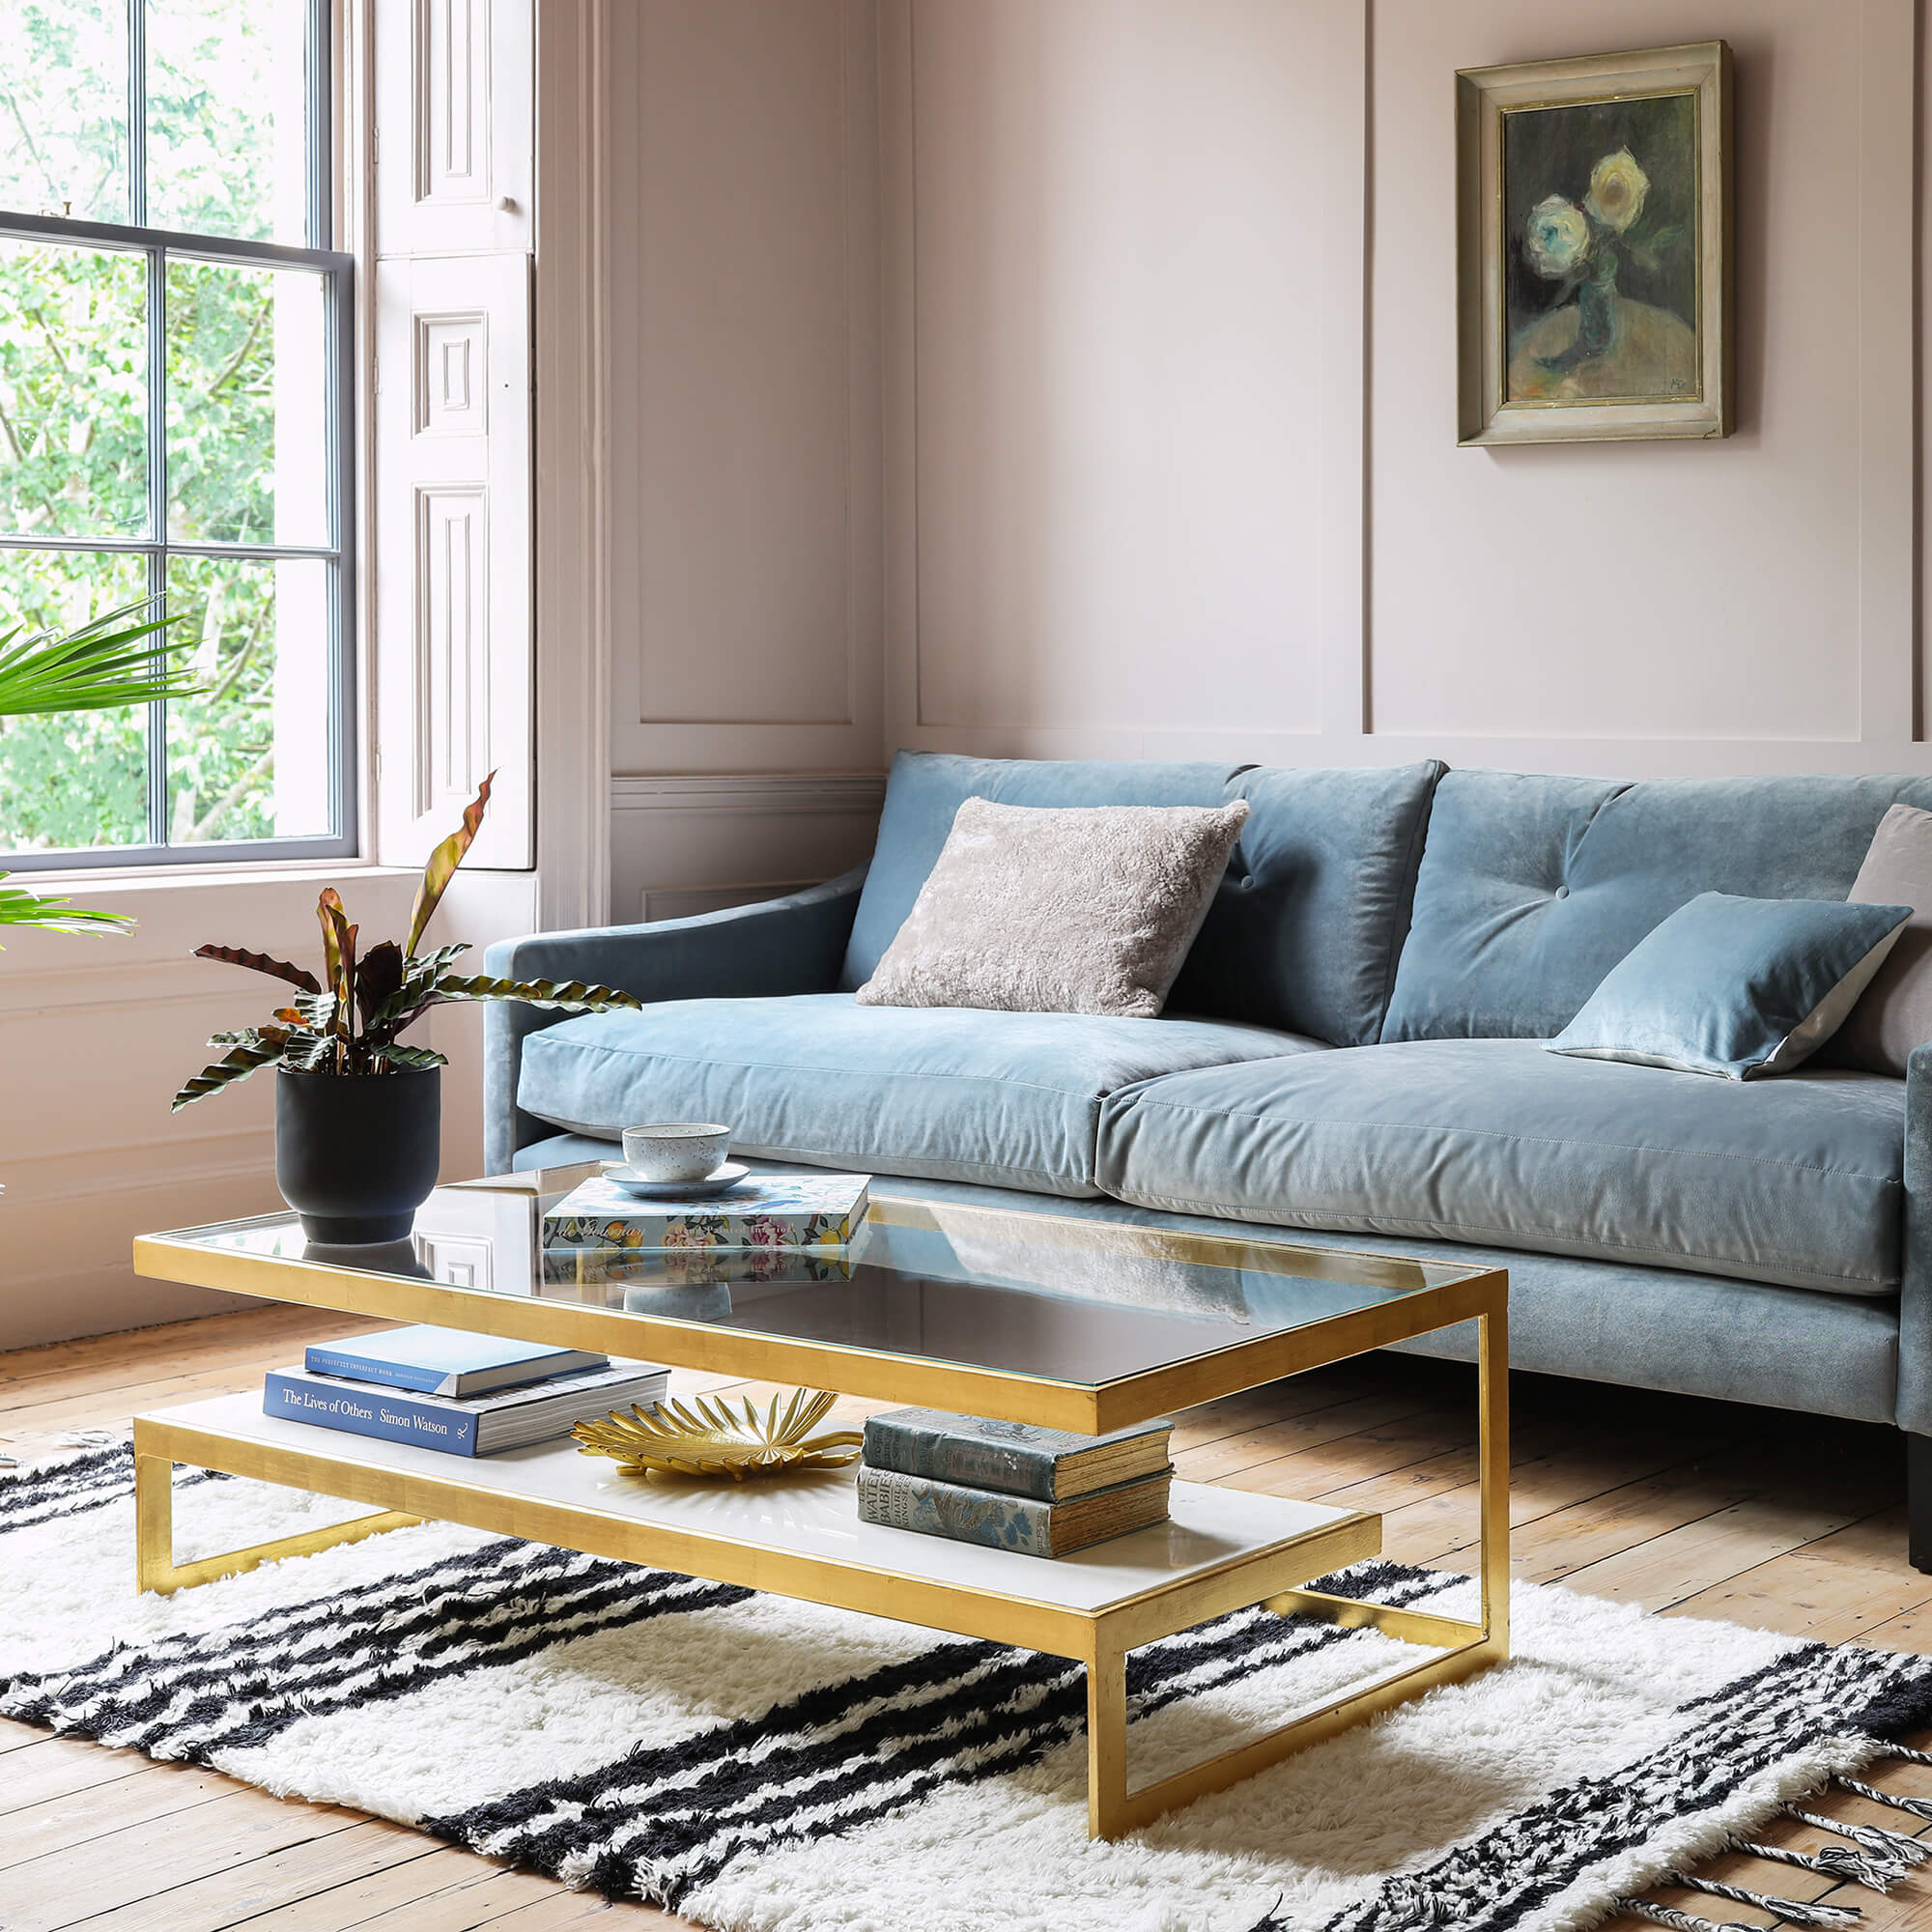 Read more about Graham and green estere gold and marble coffee table